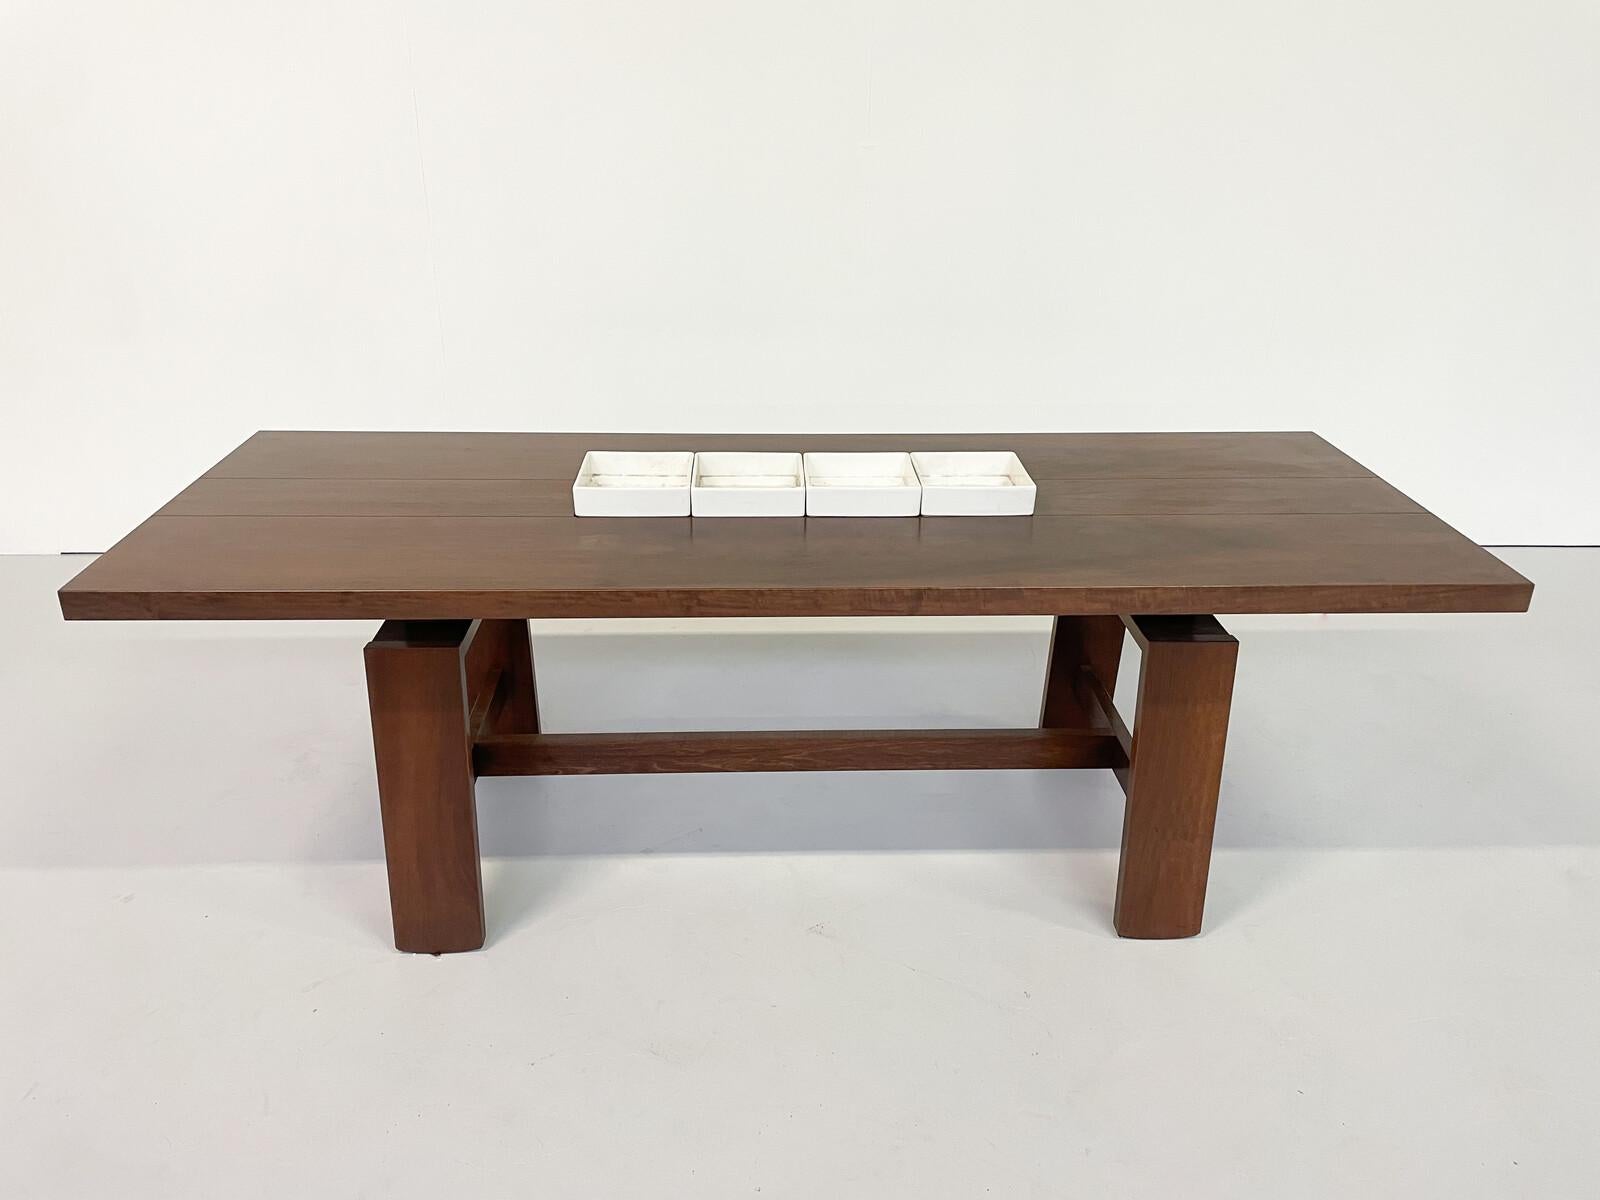 Wood Mid-Century Modern Dining Table 611 by Silvio Coppola for Bernini, 1966 For Sale